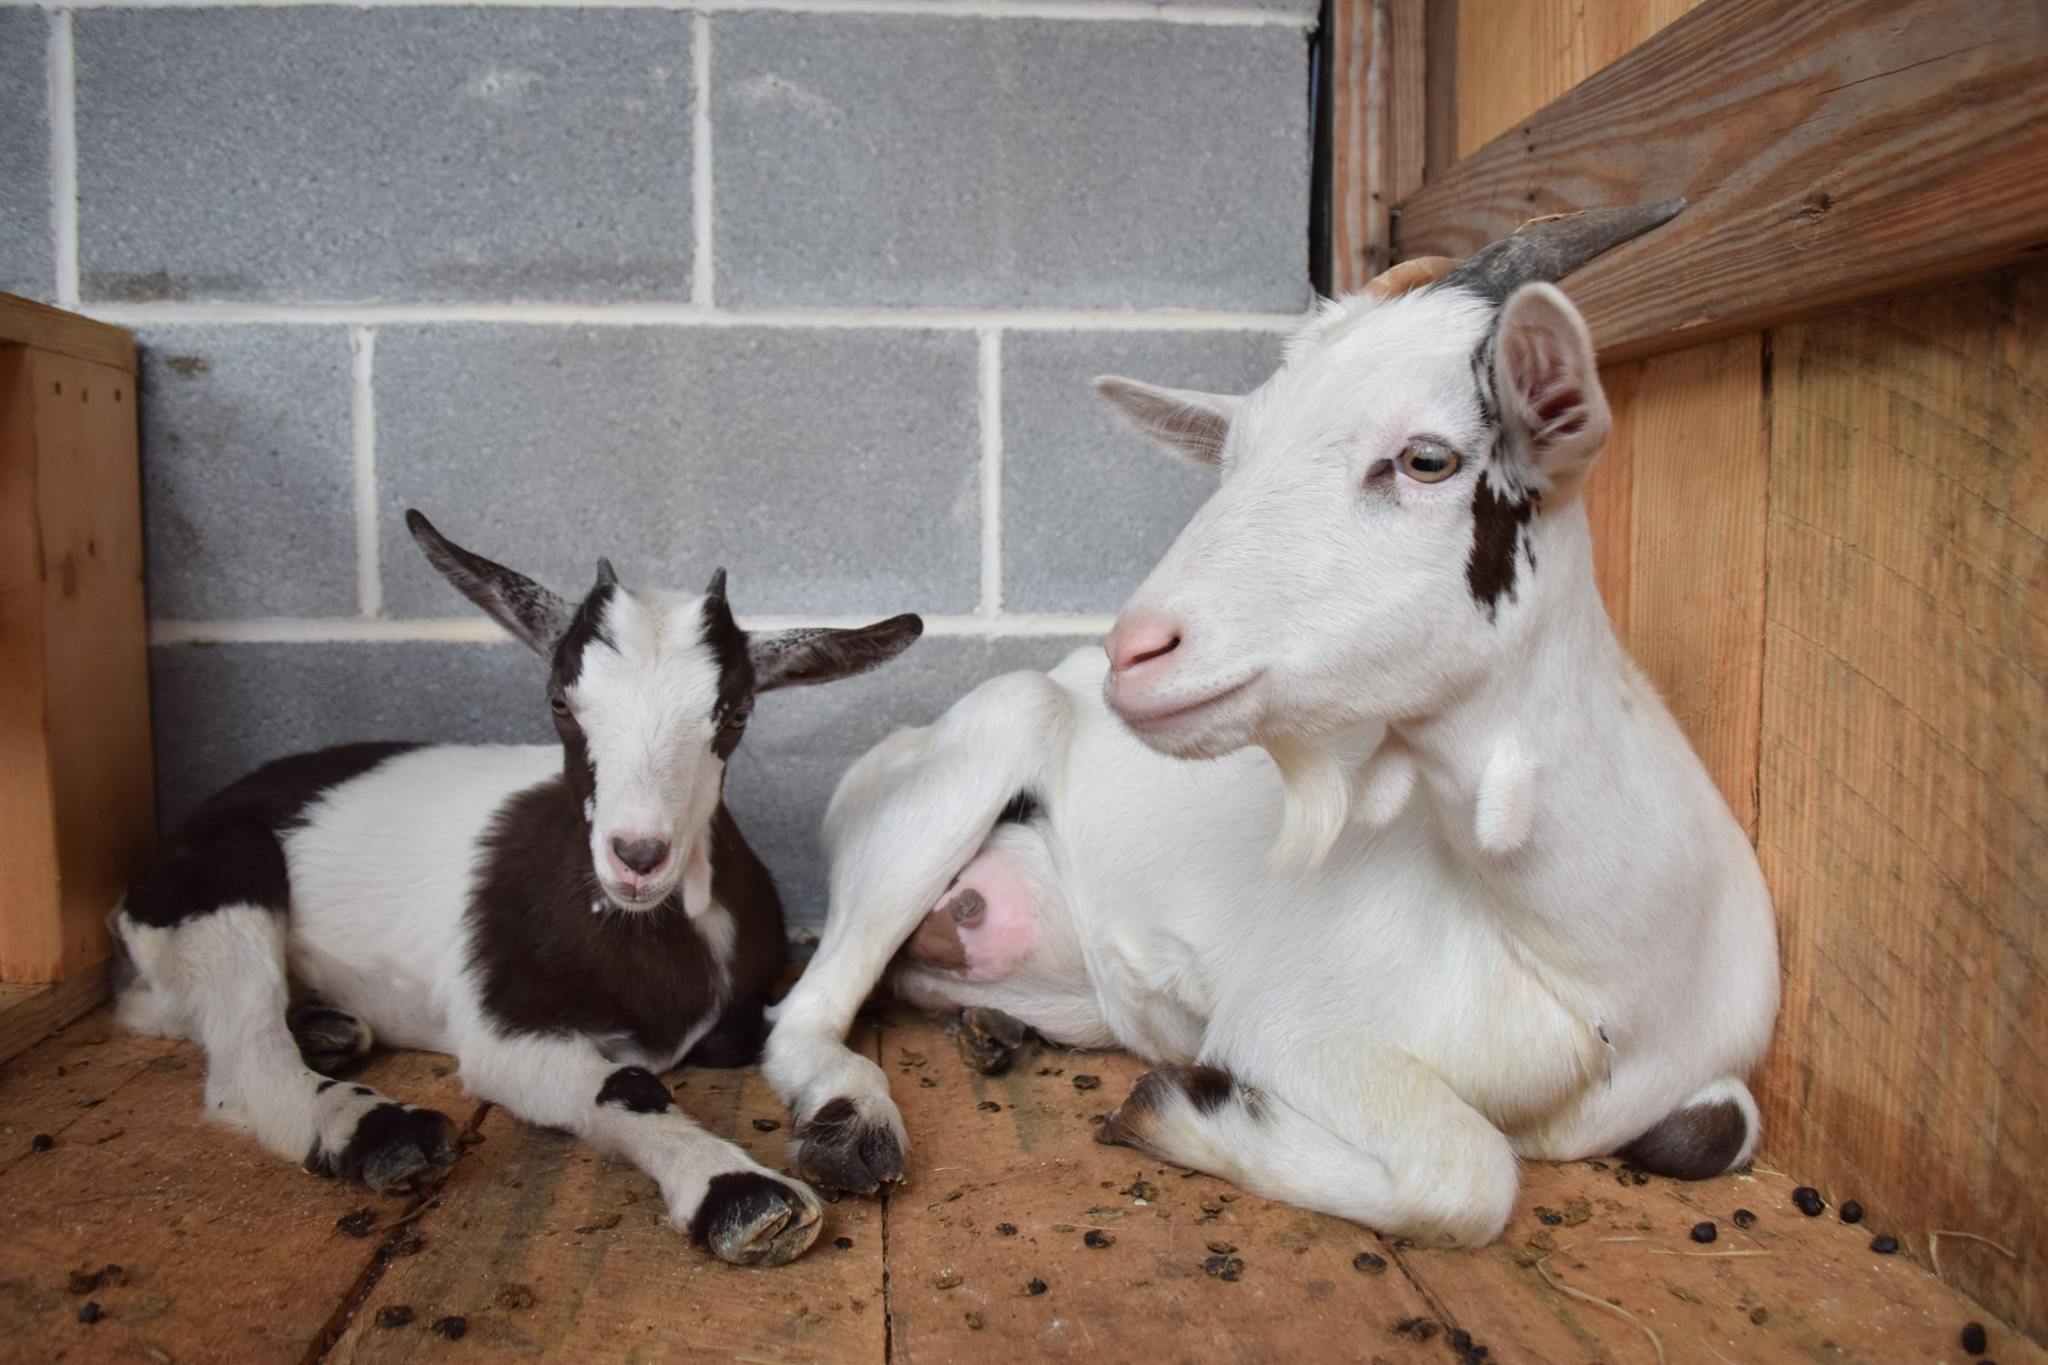 A brown and white baby goat laying next to a larger white goat